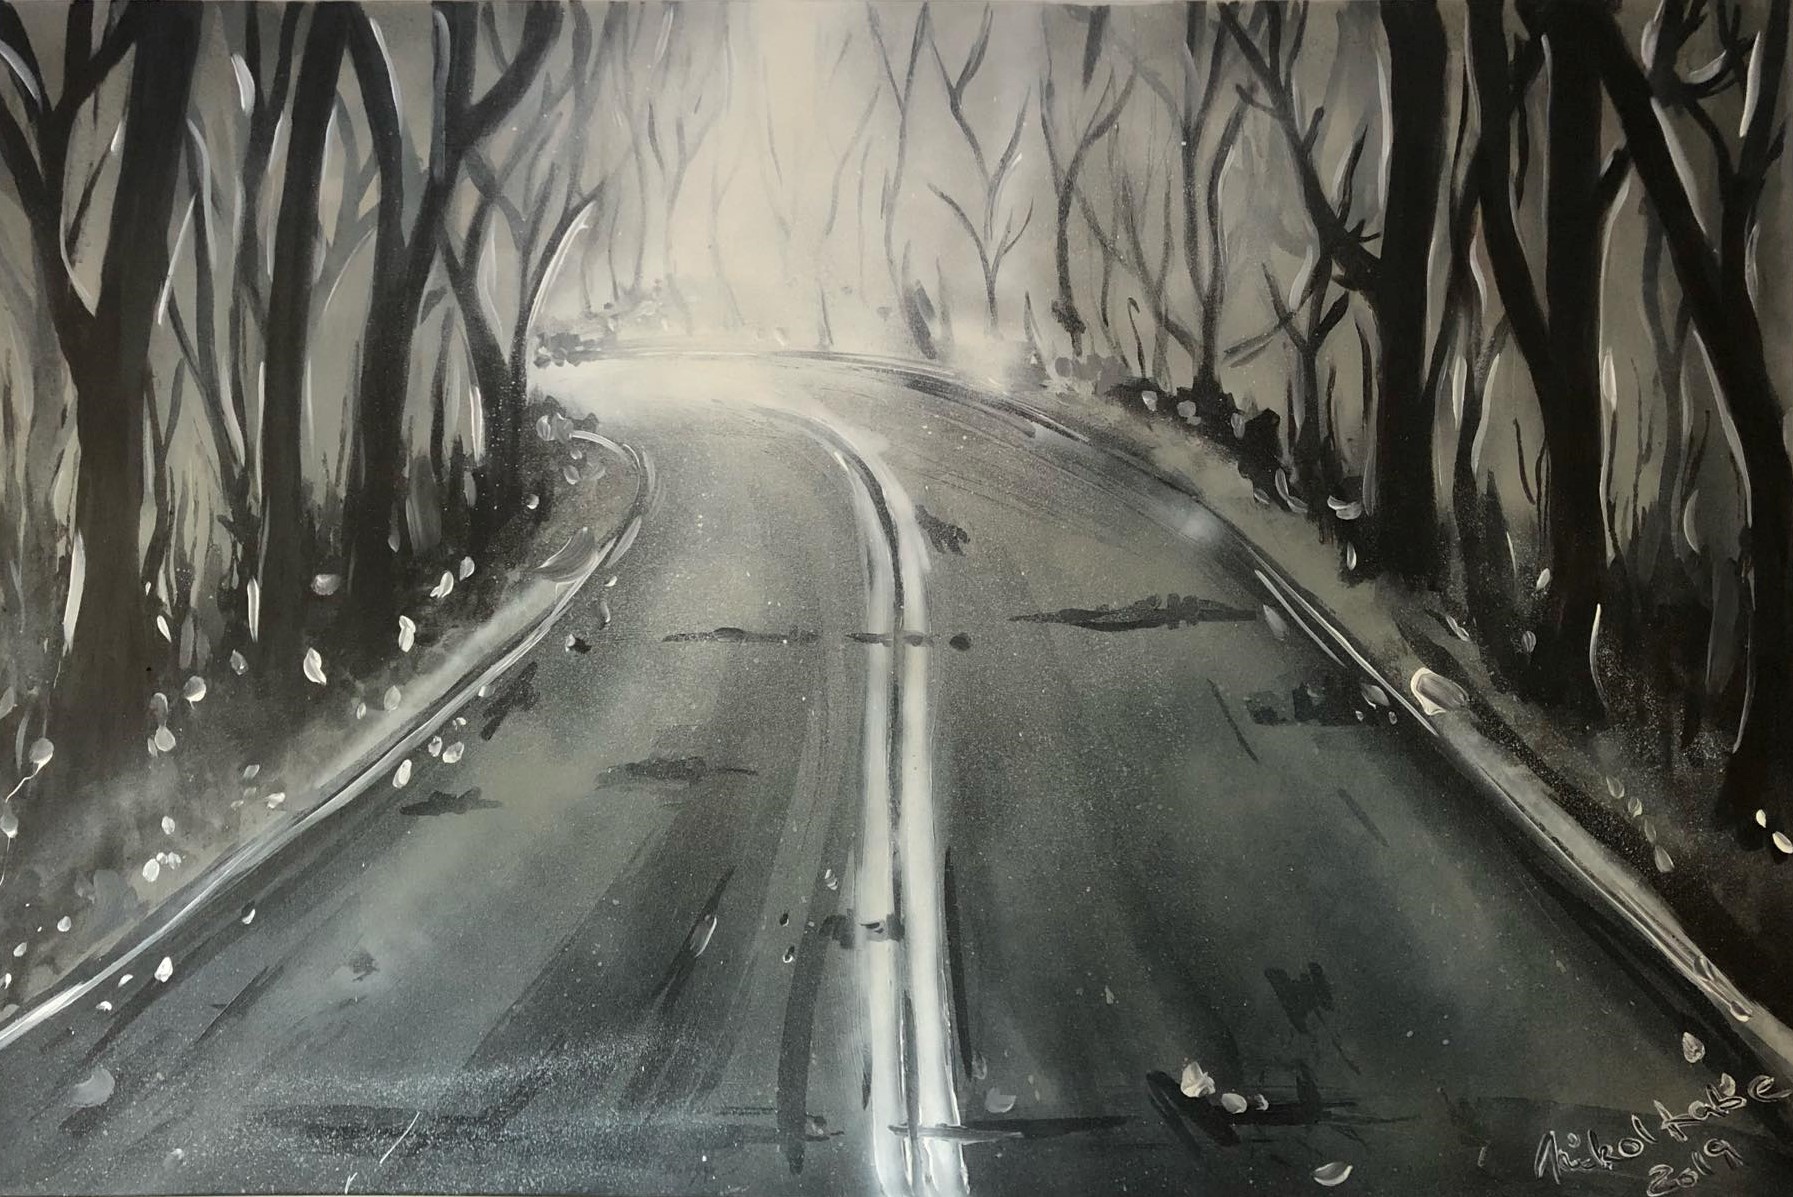 The road